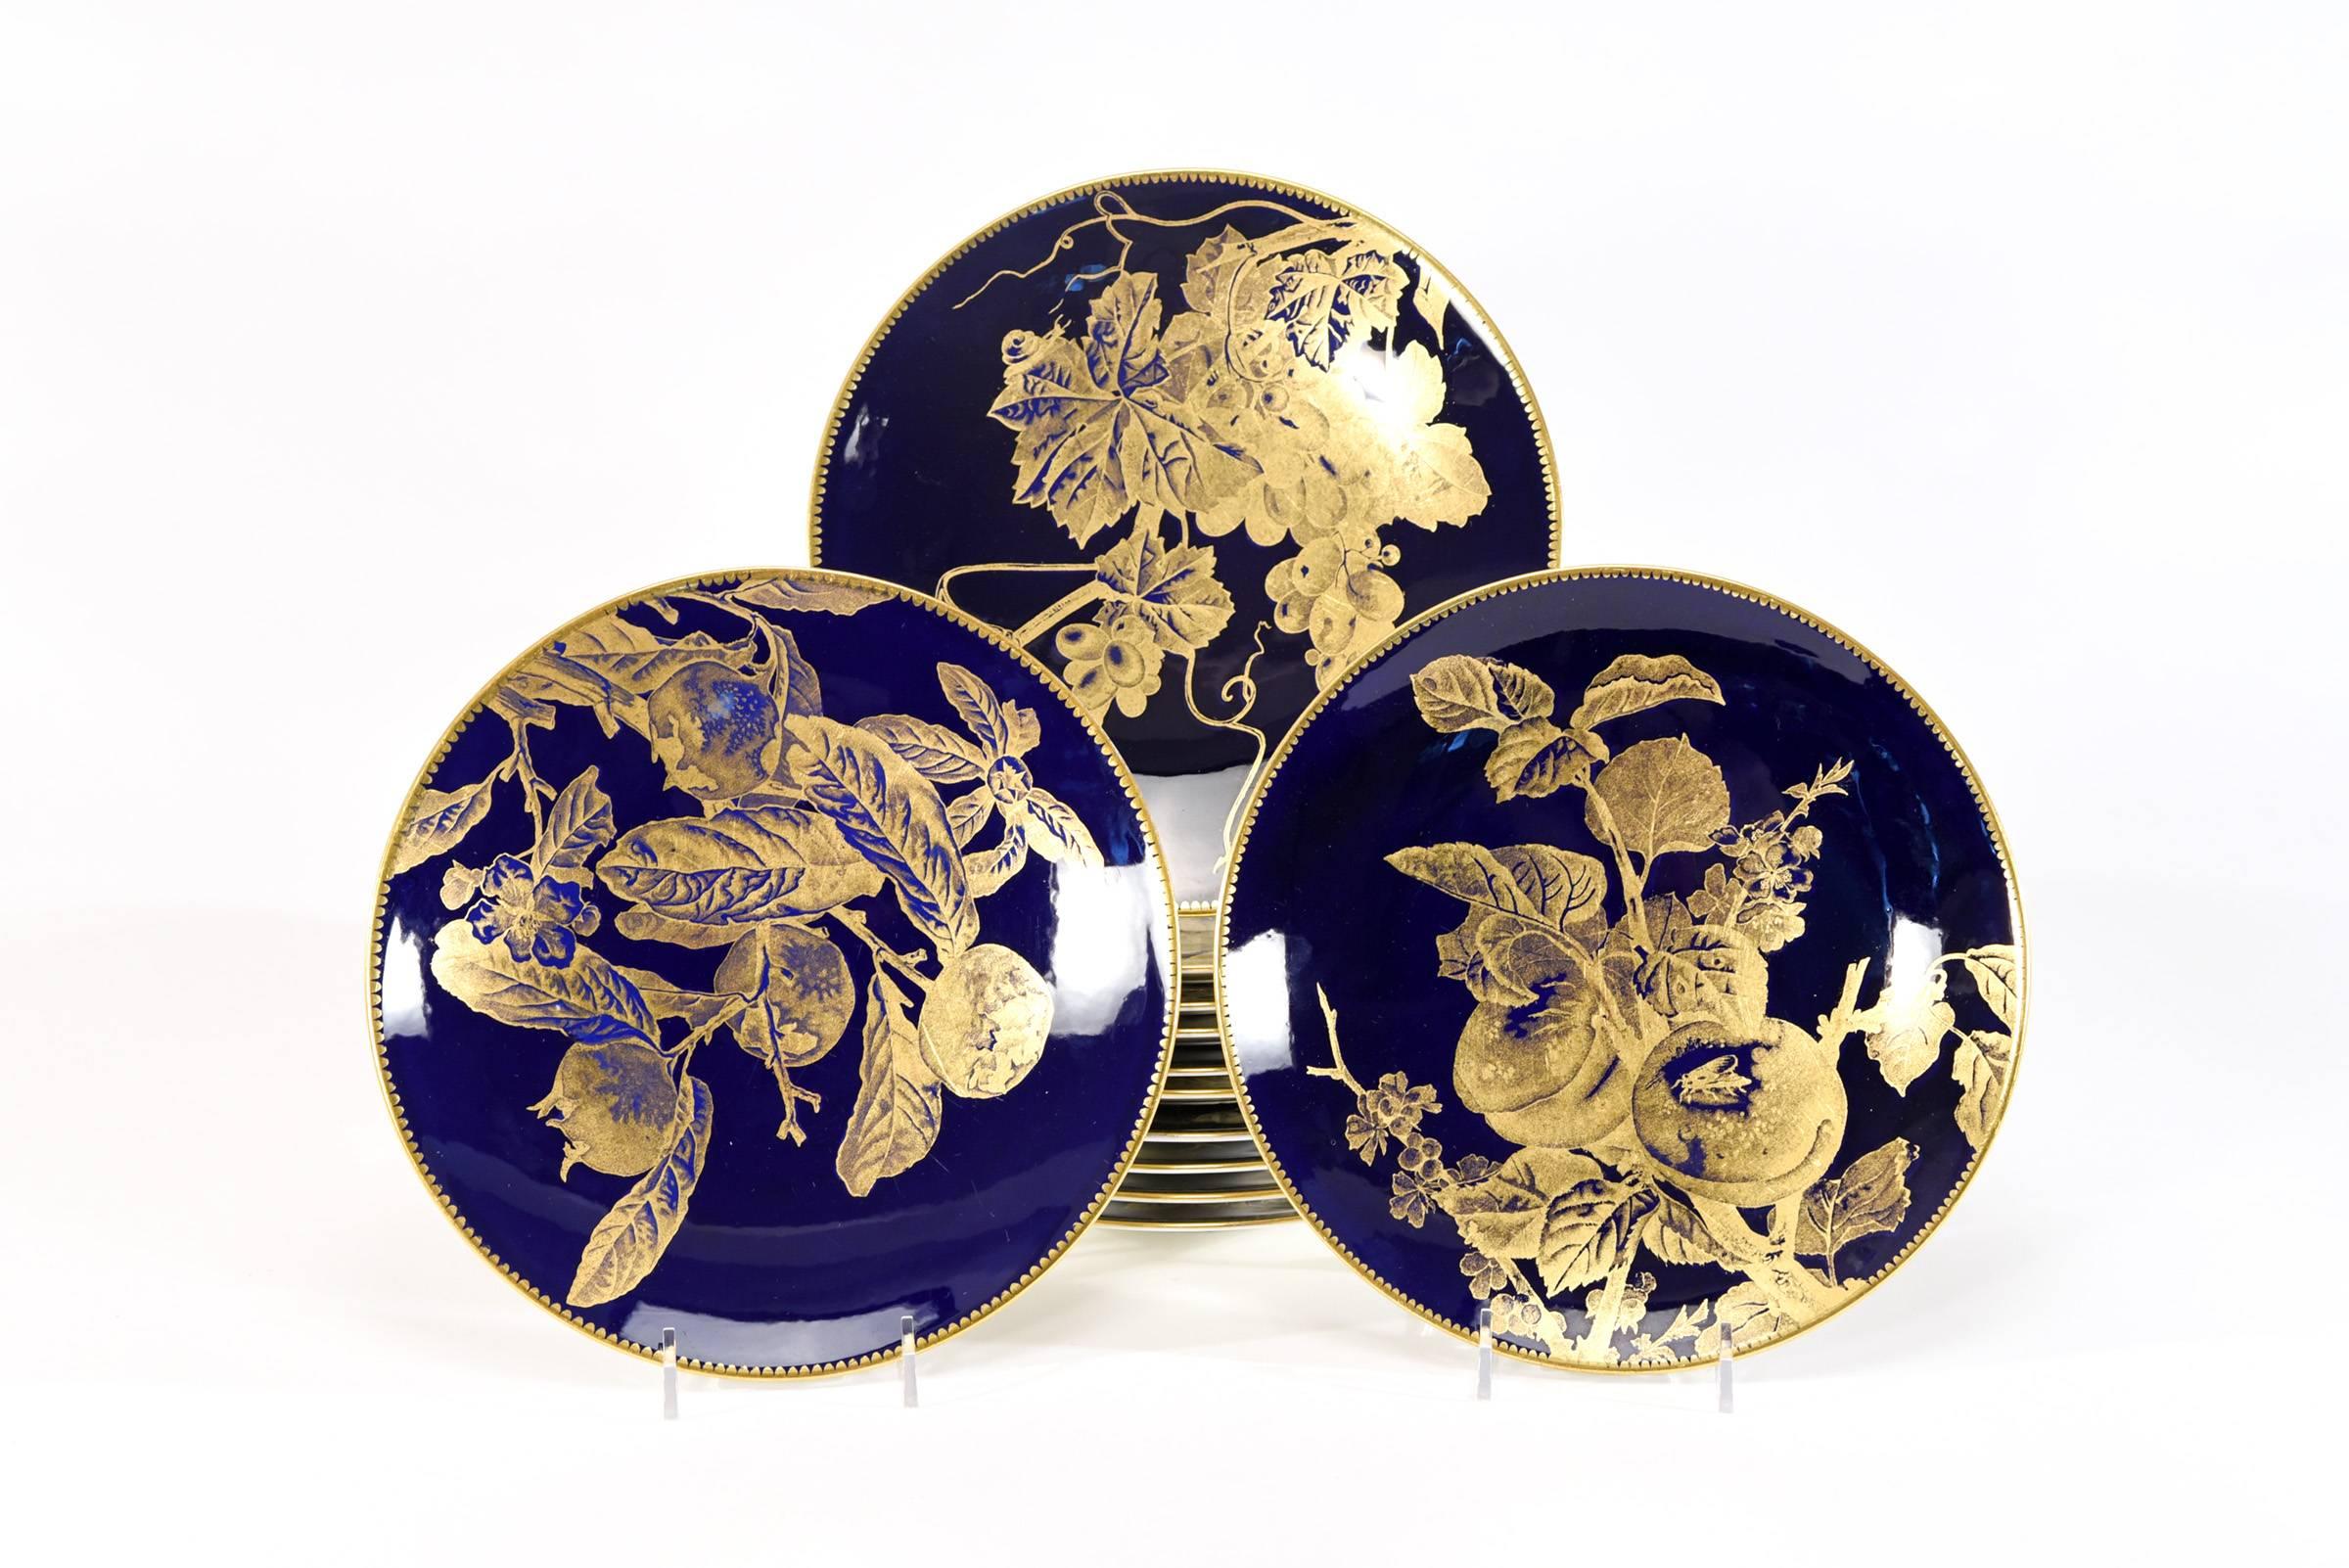 This set of 12 Brownfield 19th century dessert plates exemplify the Aesthetic Movement at its finest. Each plate is uniquely decorated with a gold overlay depicting different fruit specimens, including insects and foliage, all placed off center in